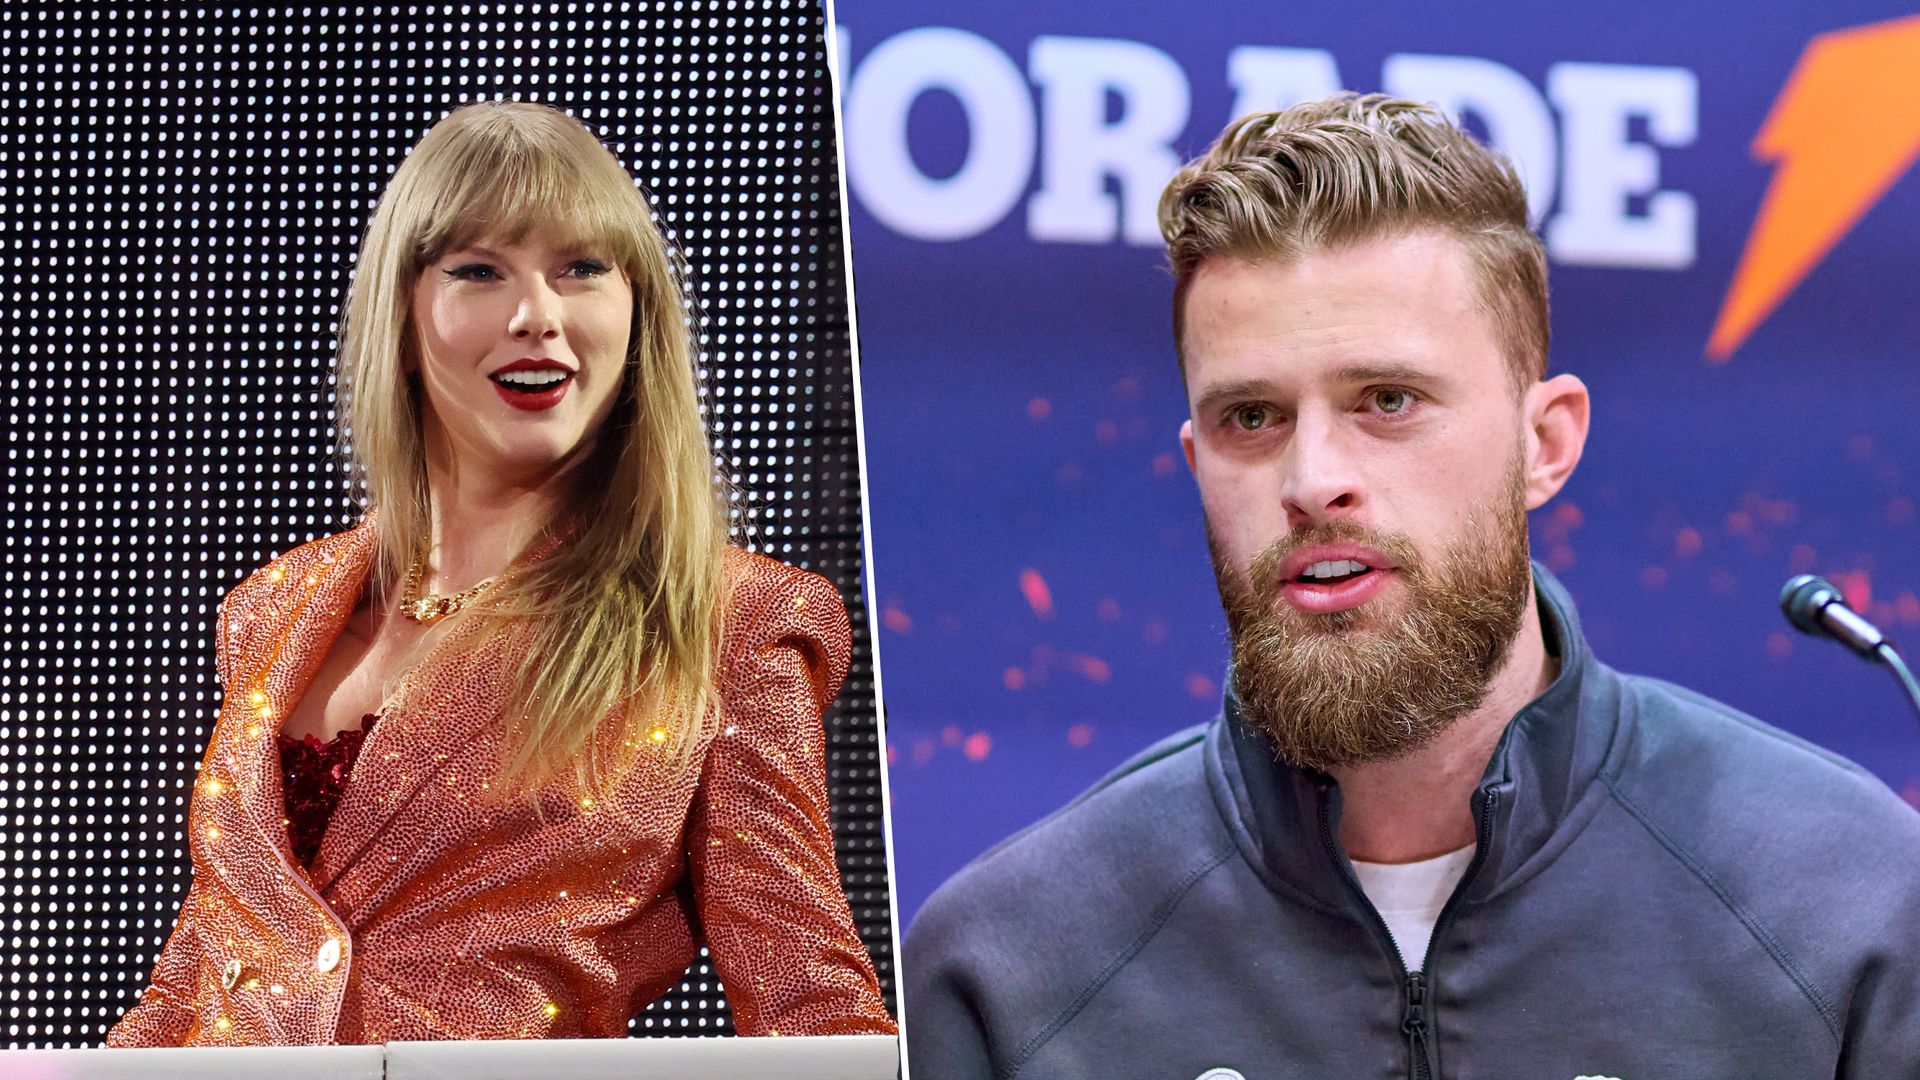 Chiefs kicker Harrison Butker's controversial speech quoting Taylor Swift denounced by NFL — and more celebrities